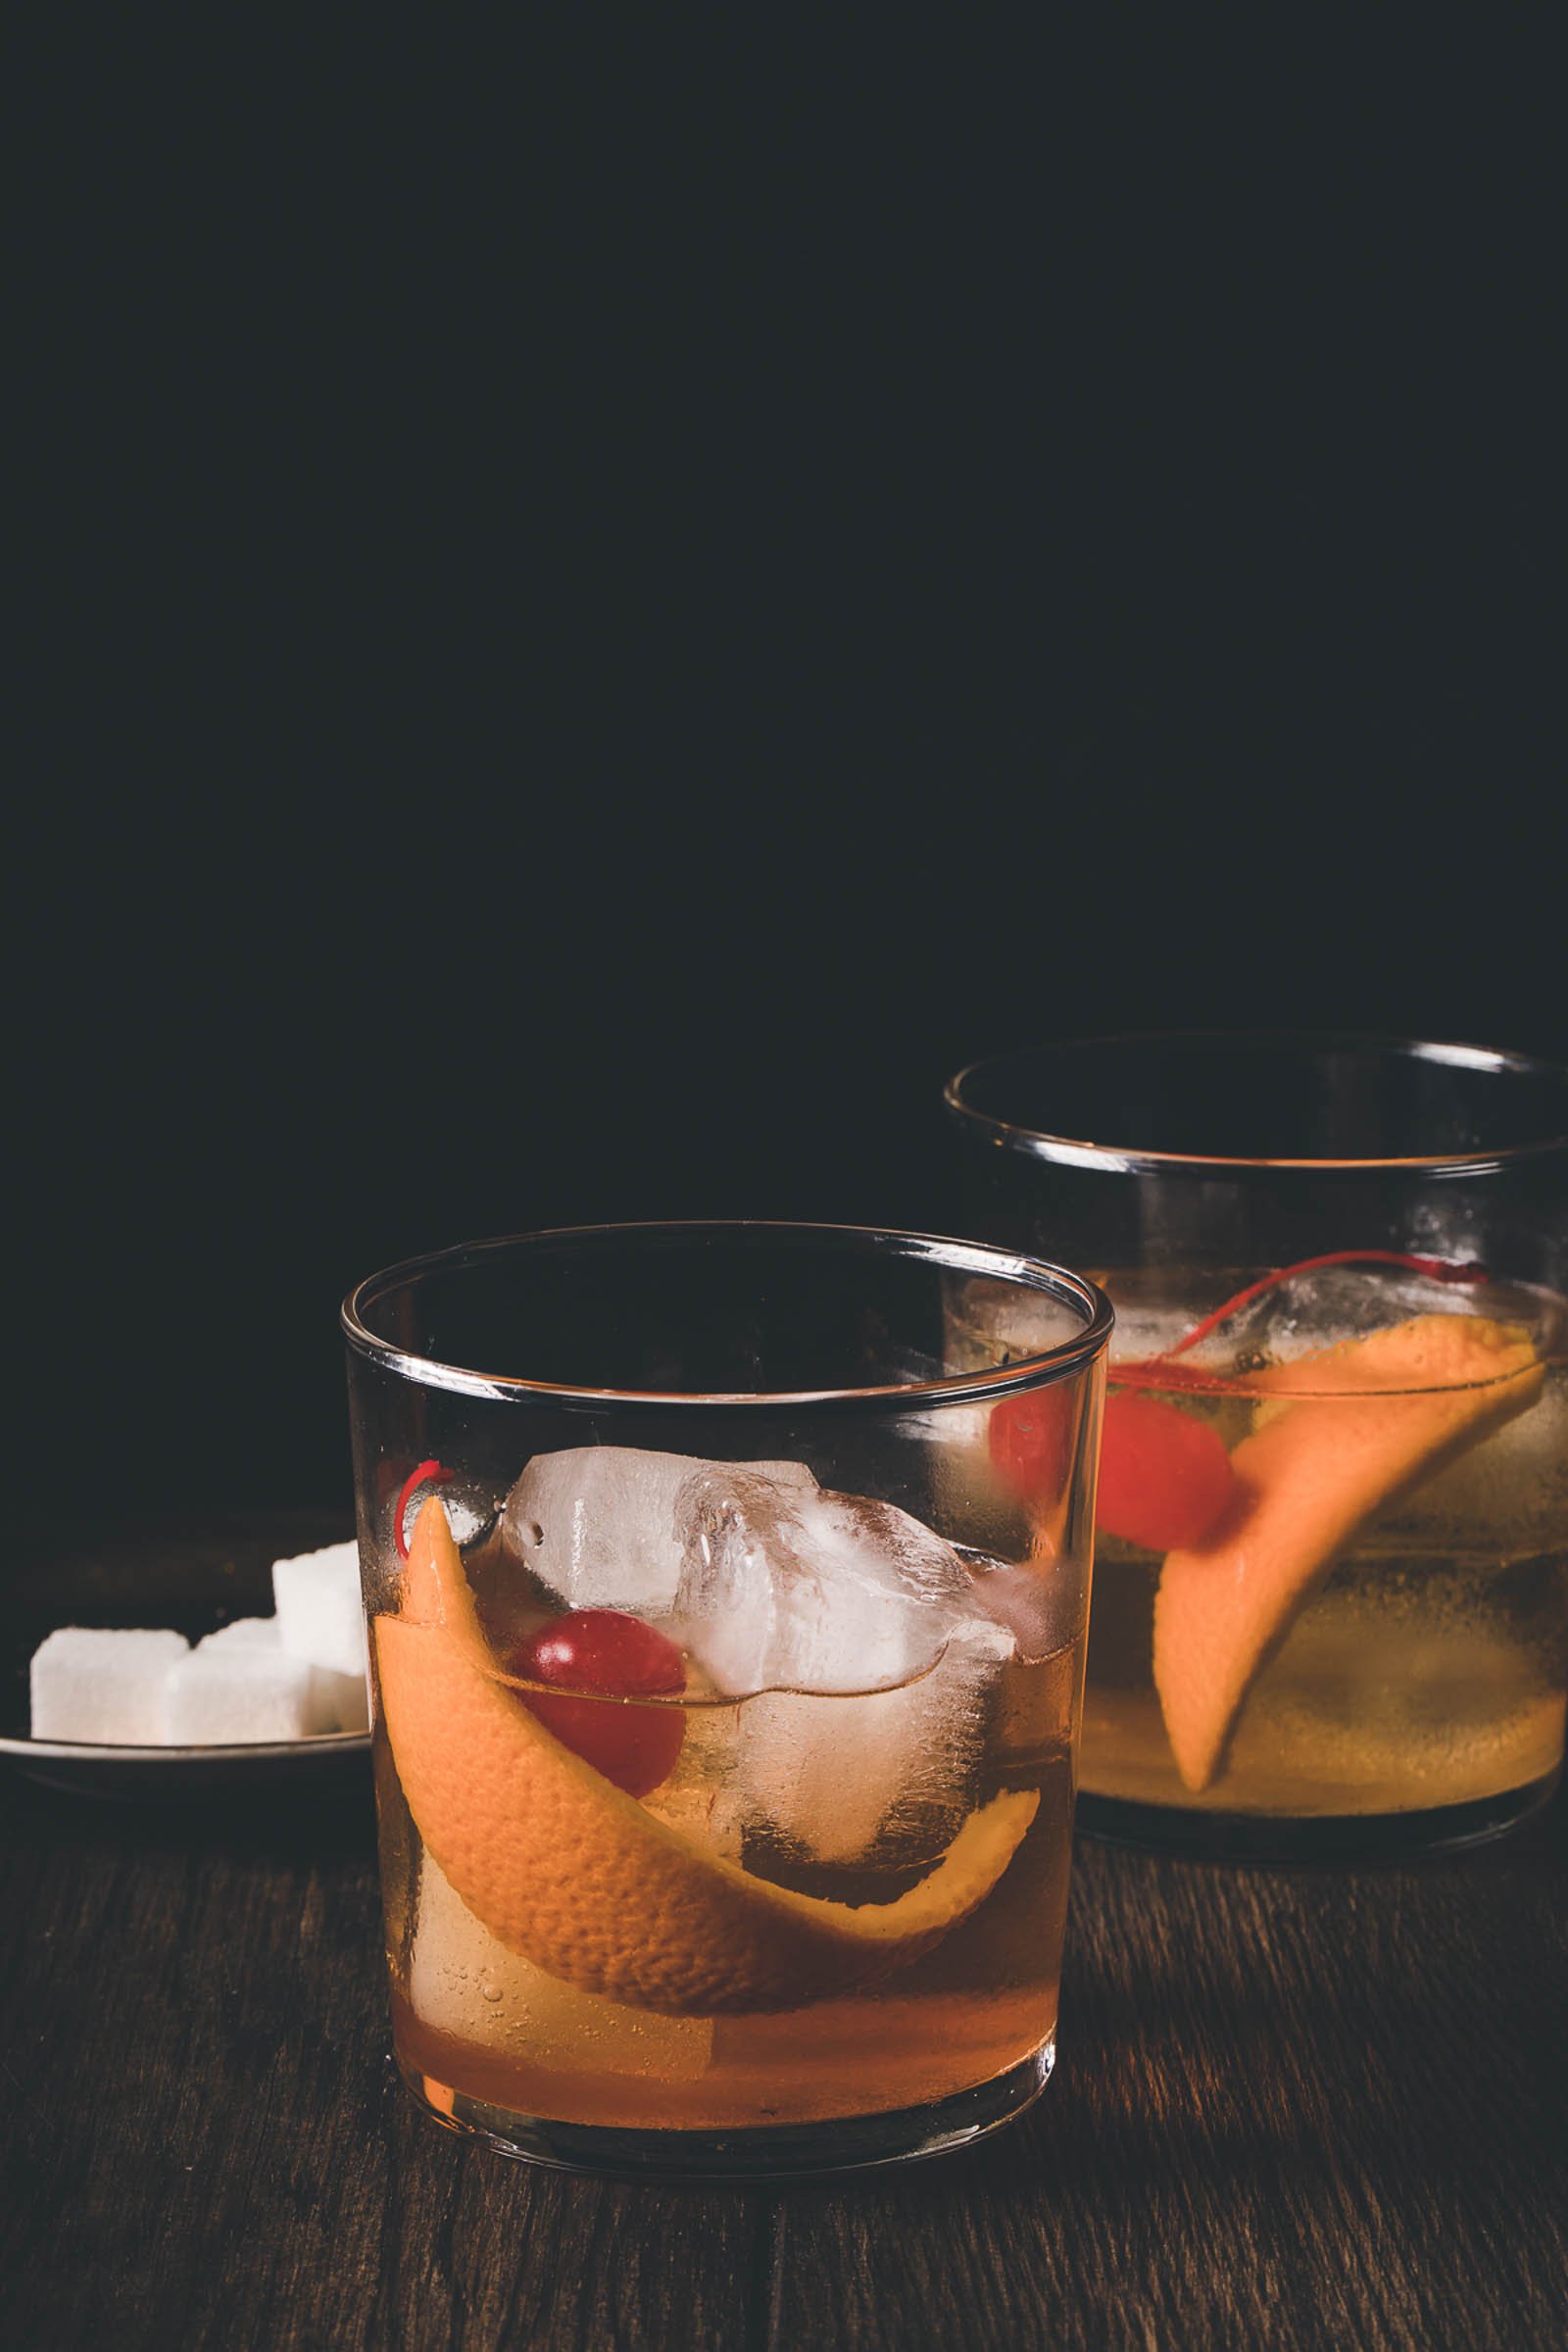 Highball glasses filled with old fashions and sugar cubes in the background.